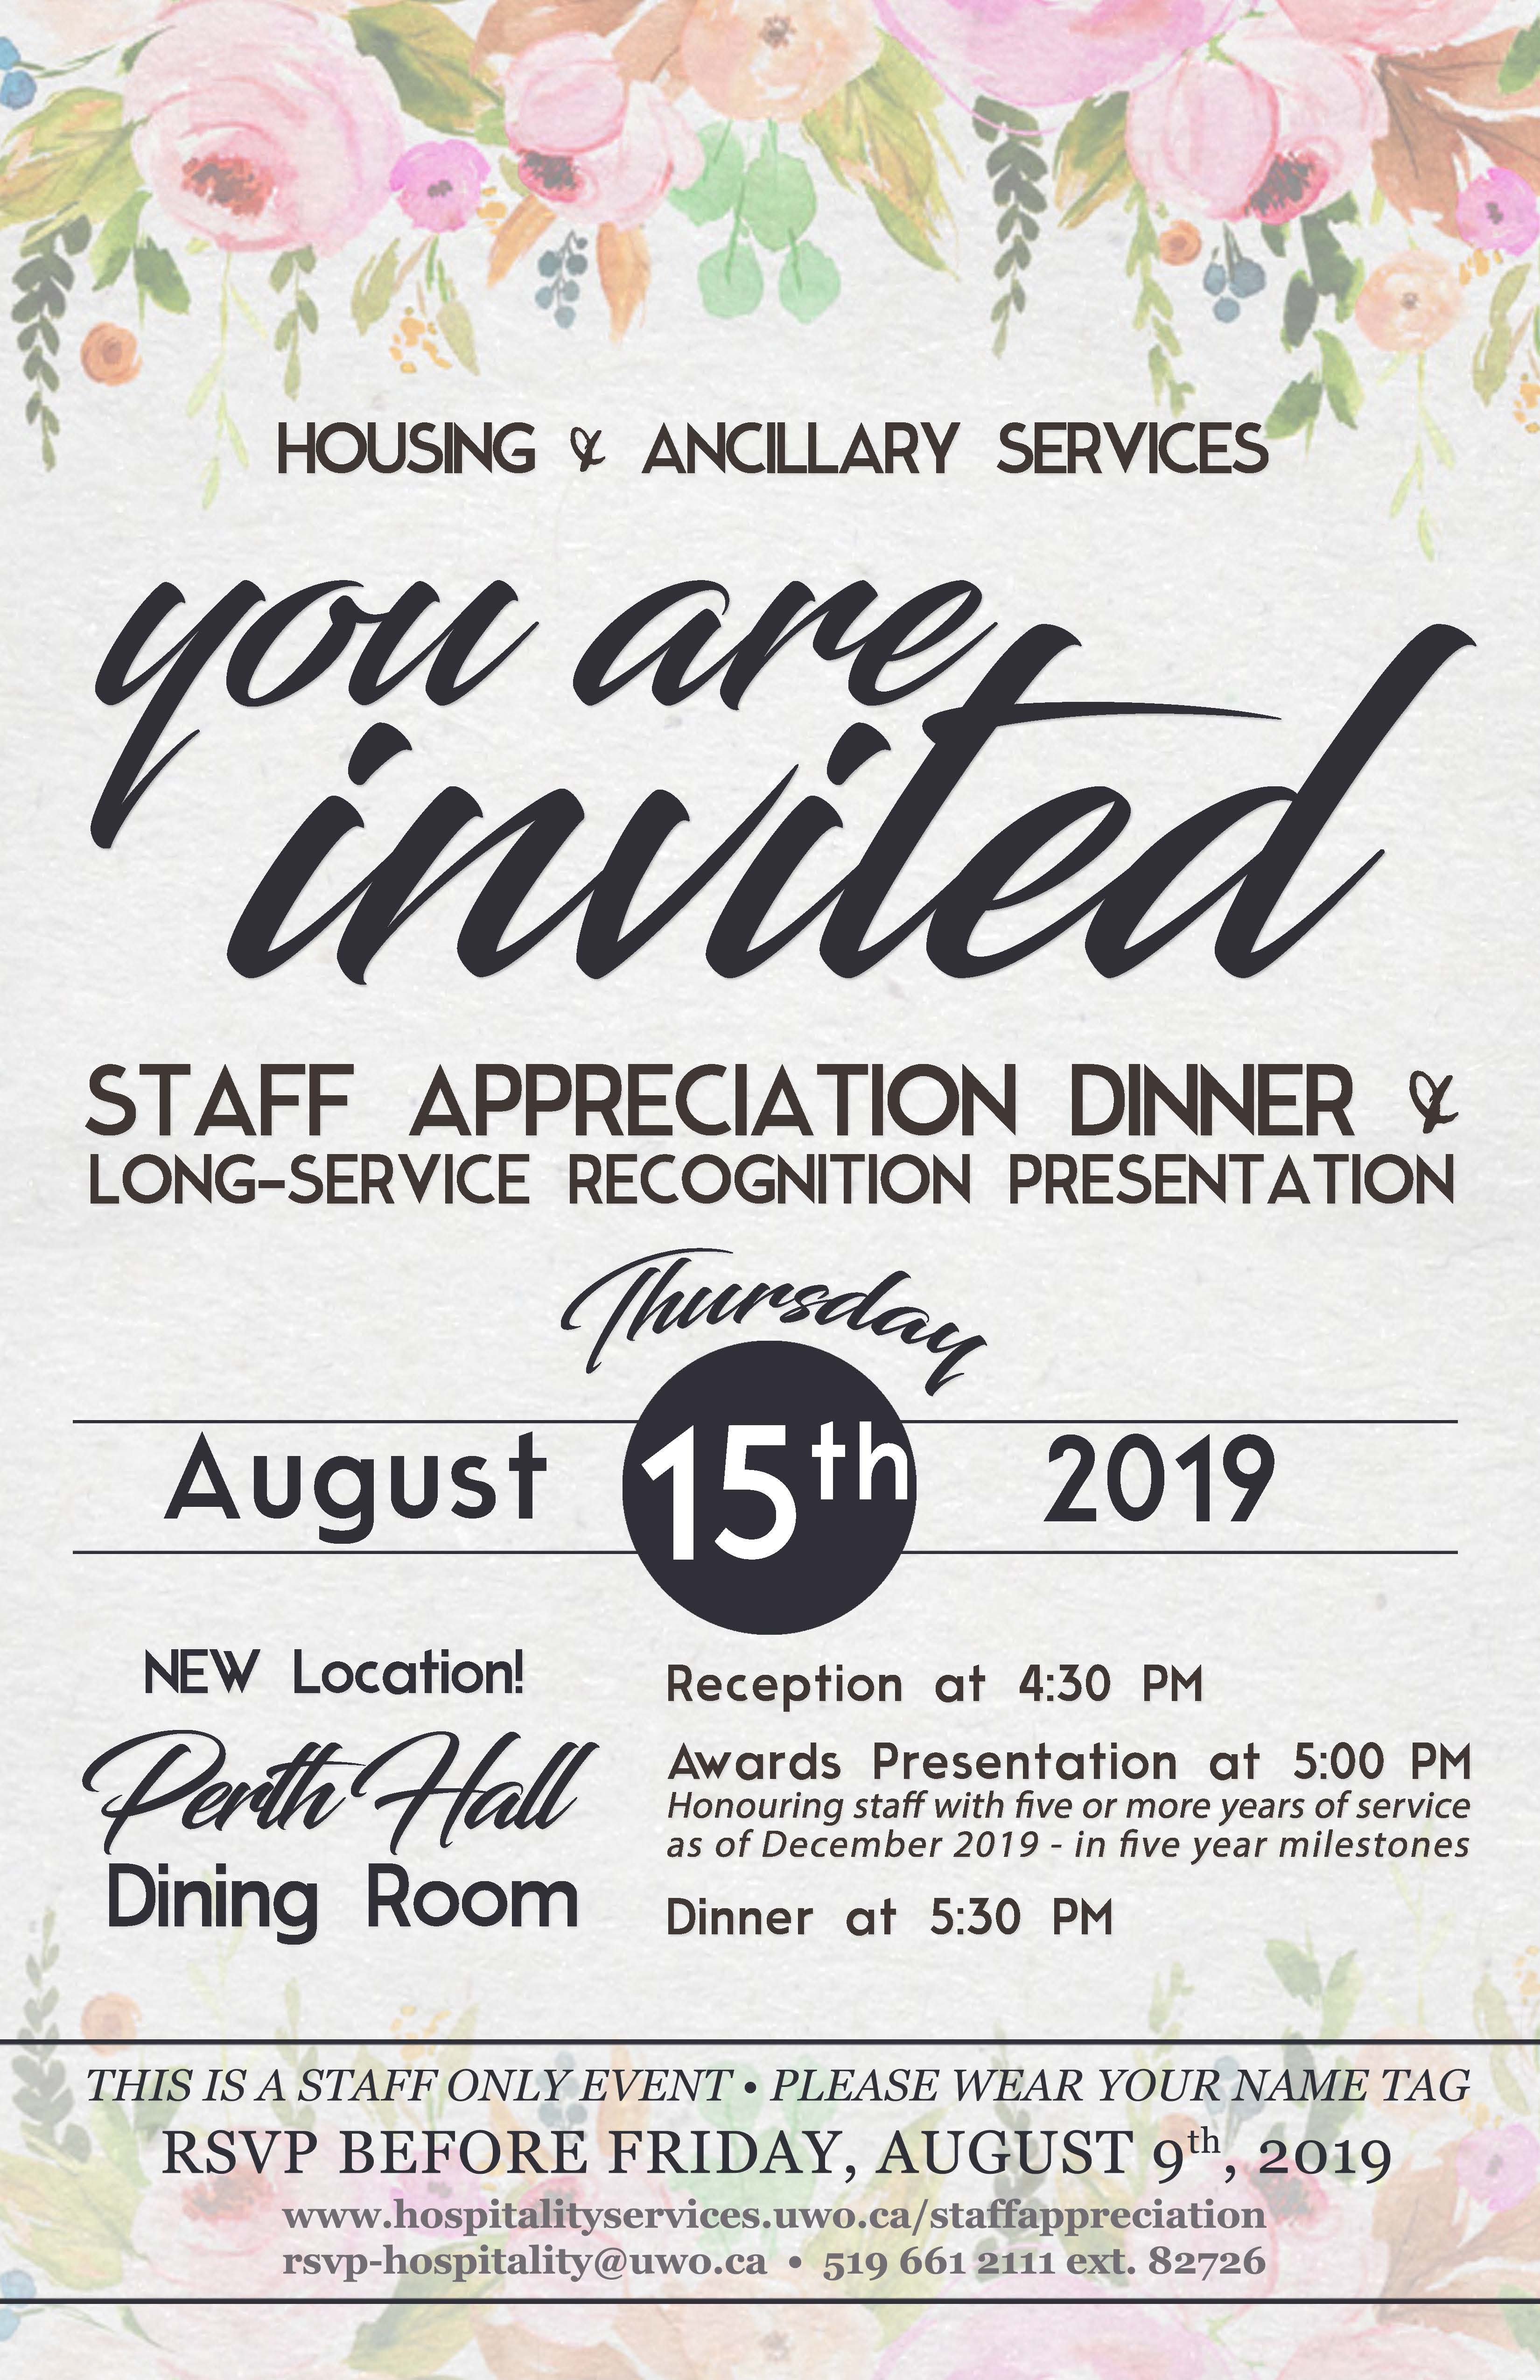 Staff Appreciation Dinner & Long-Service Recognition Presentation on Wednesday, August 8, 2018. Ontario Hall Dining Room. Reception at 4:30pm. Awards Presentation at 5pm. Dinner at 5:30pm. This is a staff only event. Please wear your name tag.